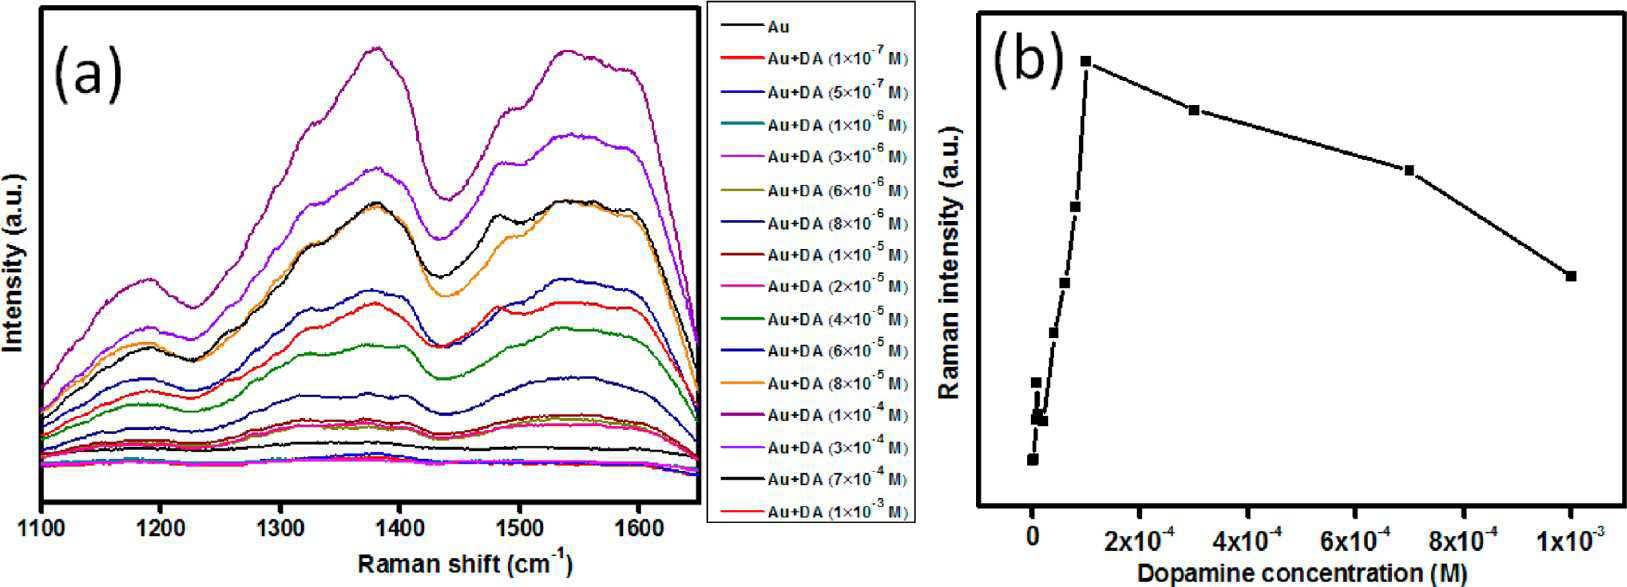 (a) Raman spectra of different concentrations of DA (1×10−7 to 1×10−3 M) adsorbed on Au NPs, (b) Raman intensity of DA adsorbed Au NPs at 1480 cm−1 with increasing concentrations of DA